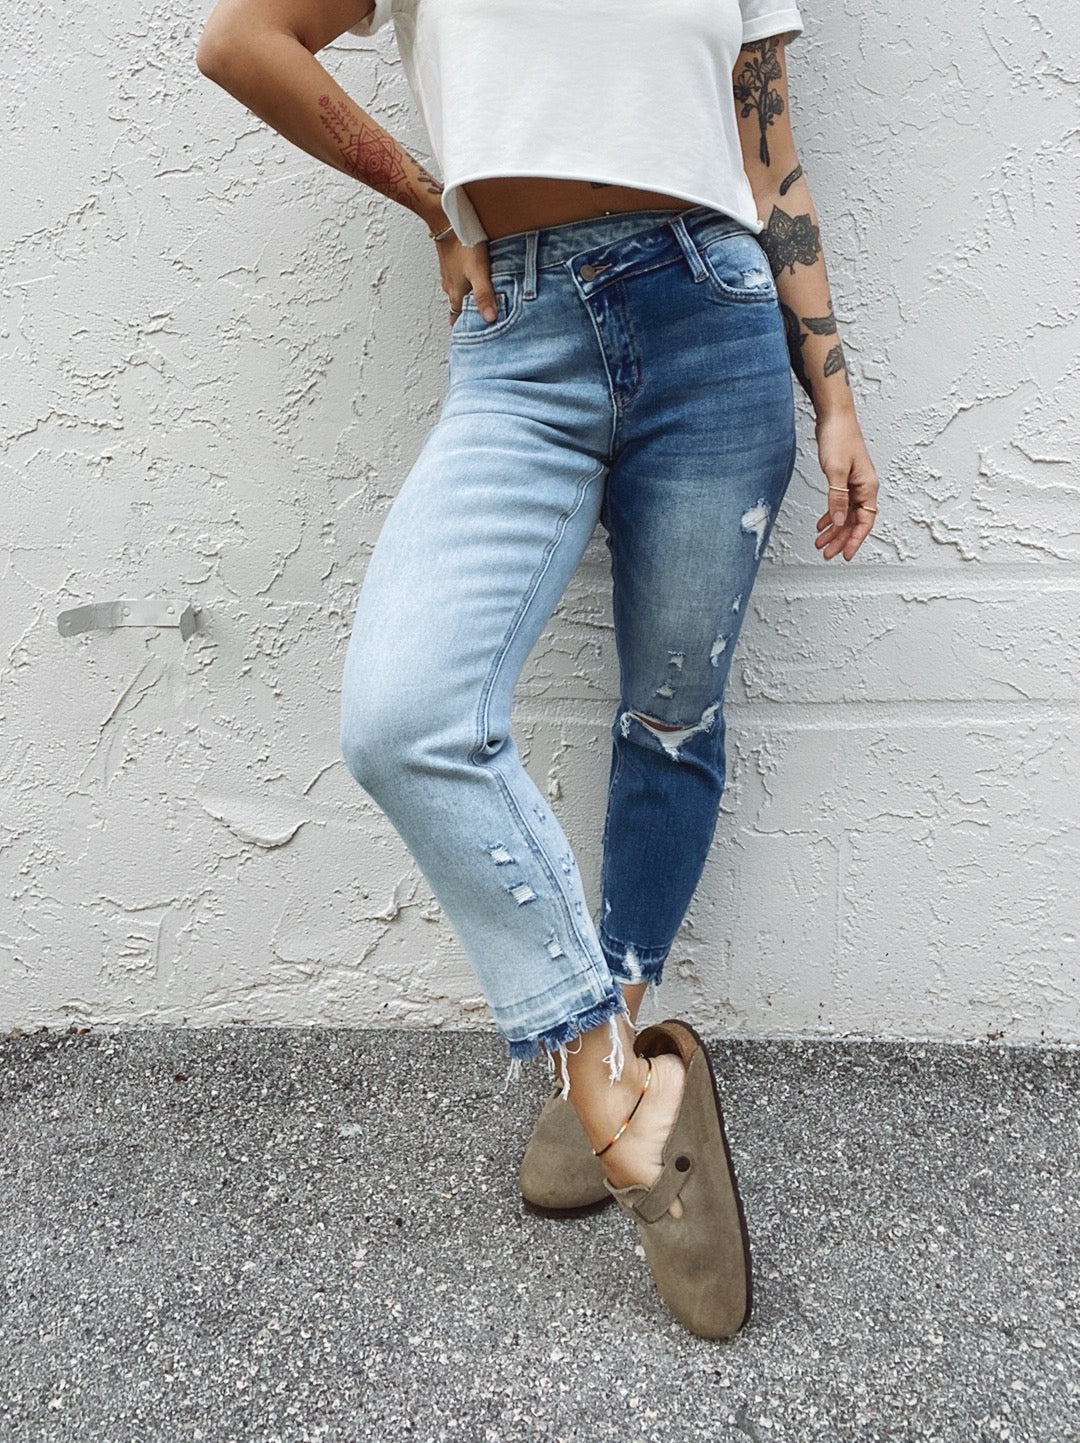 Spice Up Your Life Criss Cross Ombre Cropped Denim